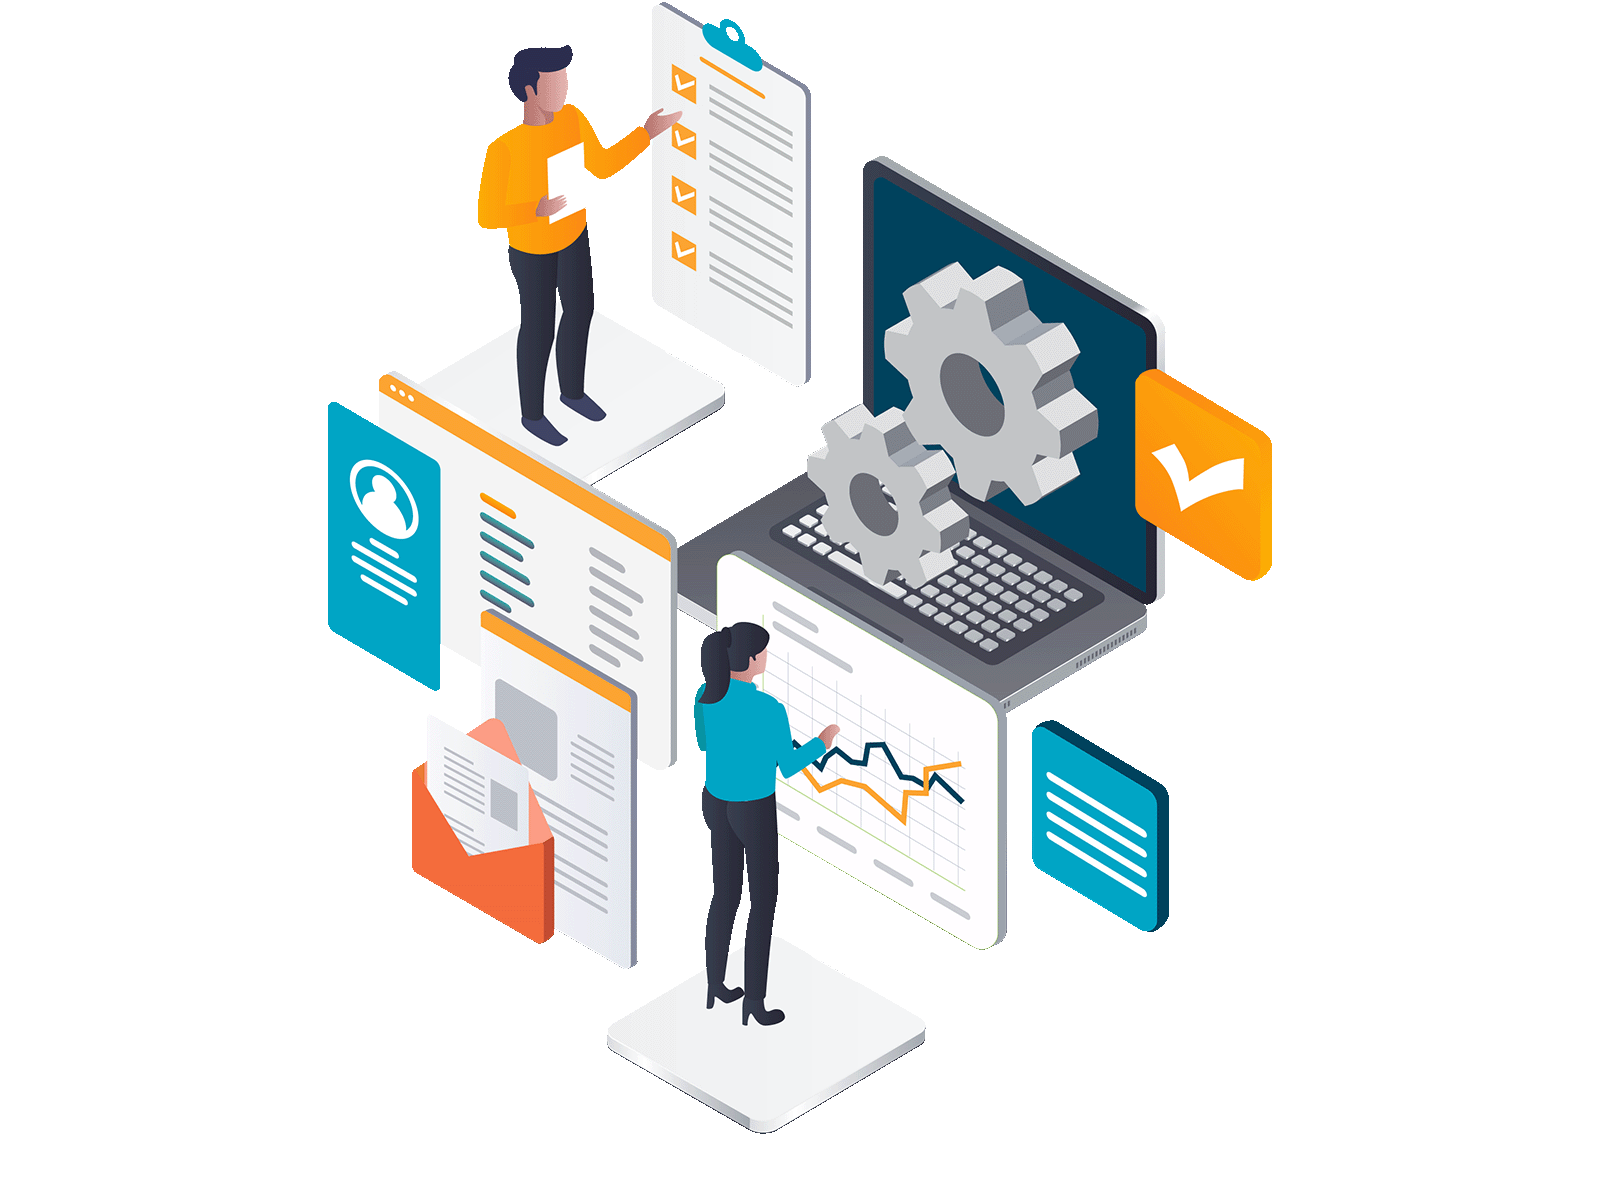 isometric design of people using integrated technology and systems